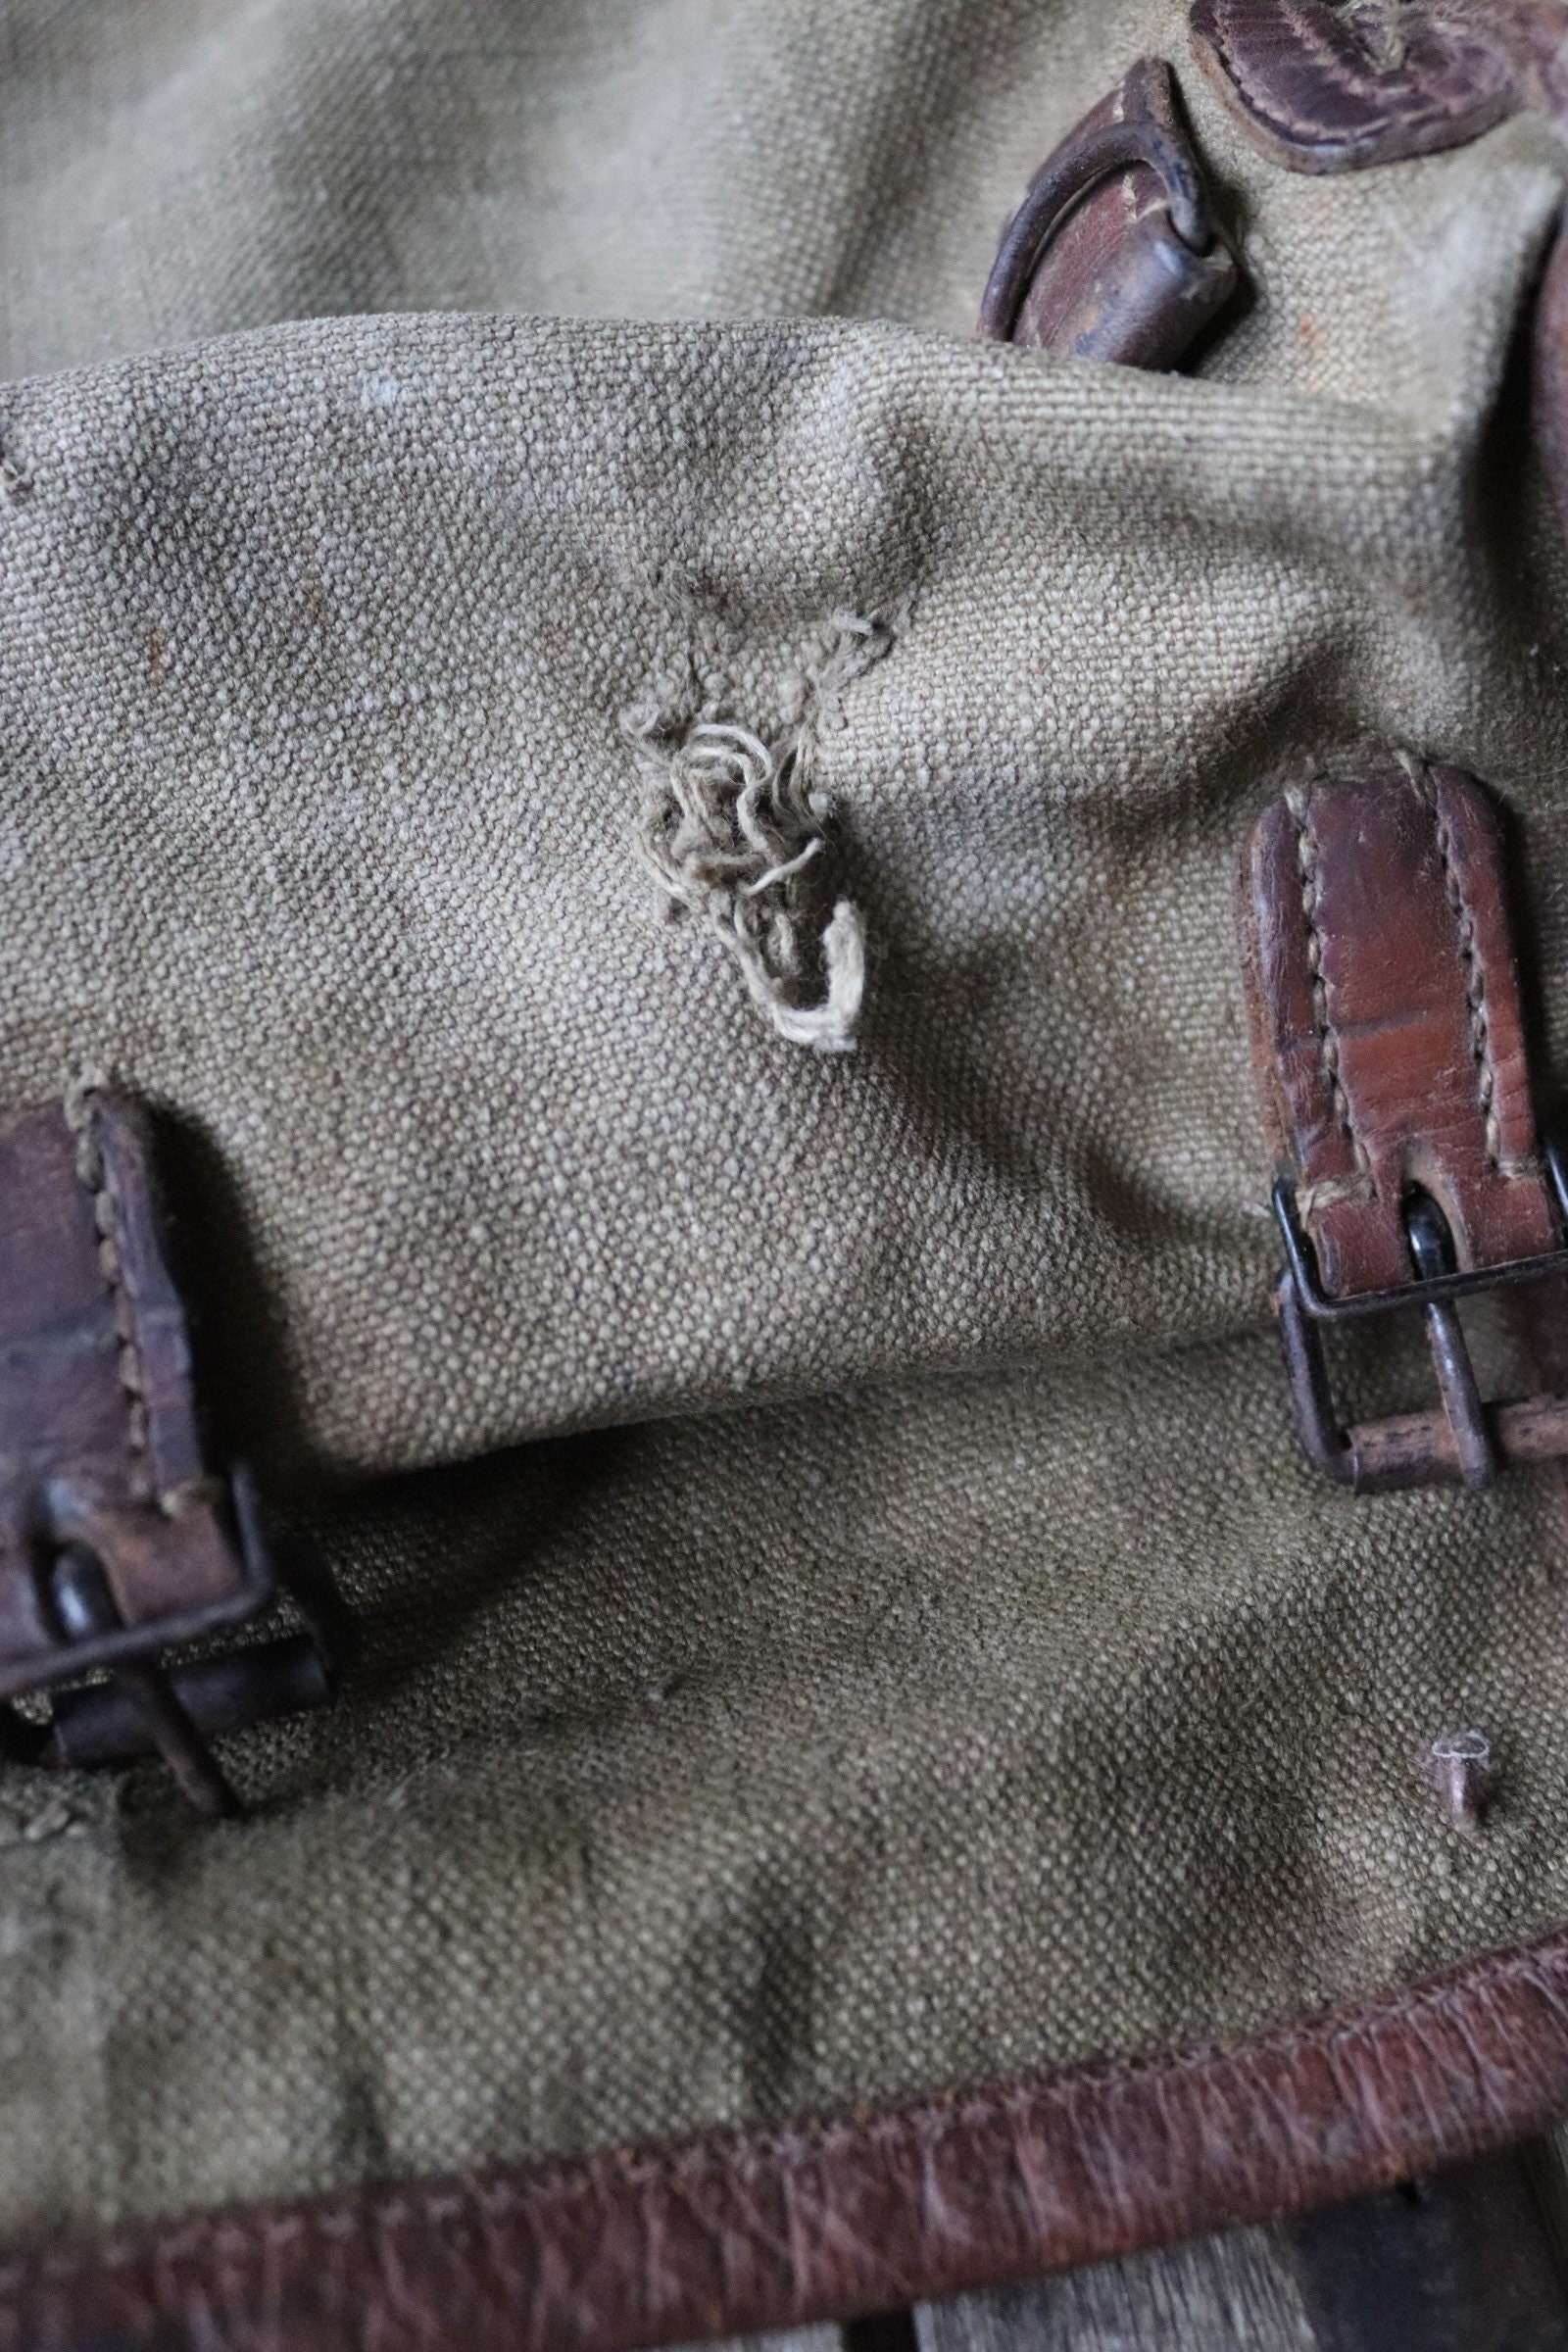 Vintage 1930s 30s 1940s 40s French M35 M 35 military backpack rucksack ...